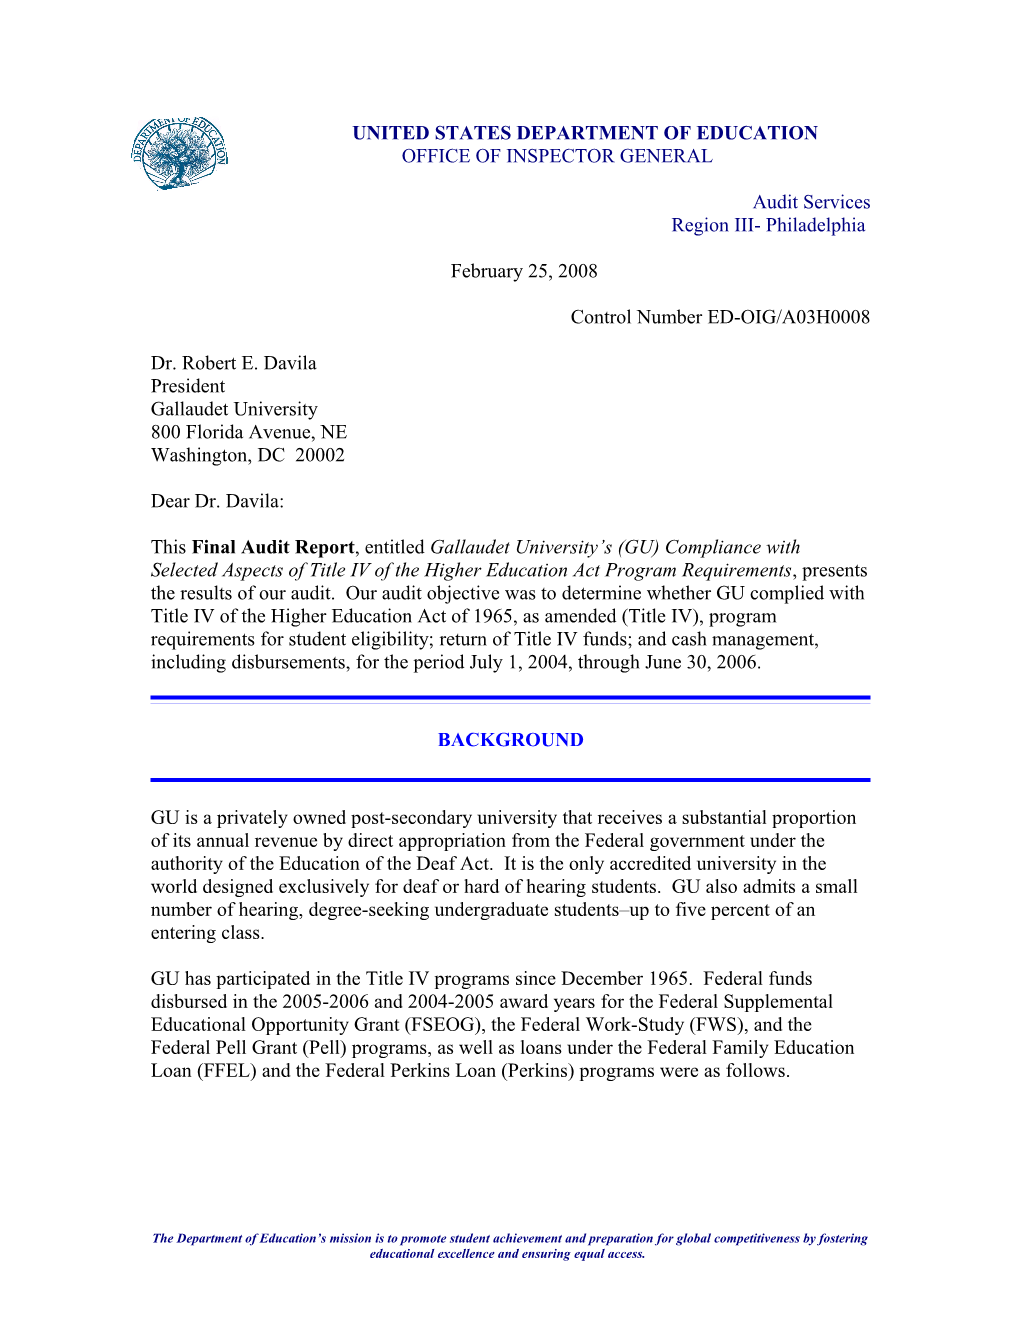 OIG Audit Report: Gallaudet University's (GU) Compliance with Selected Aspects of the Title